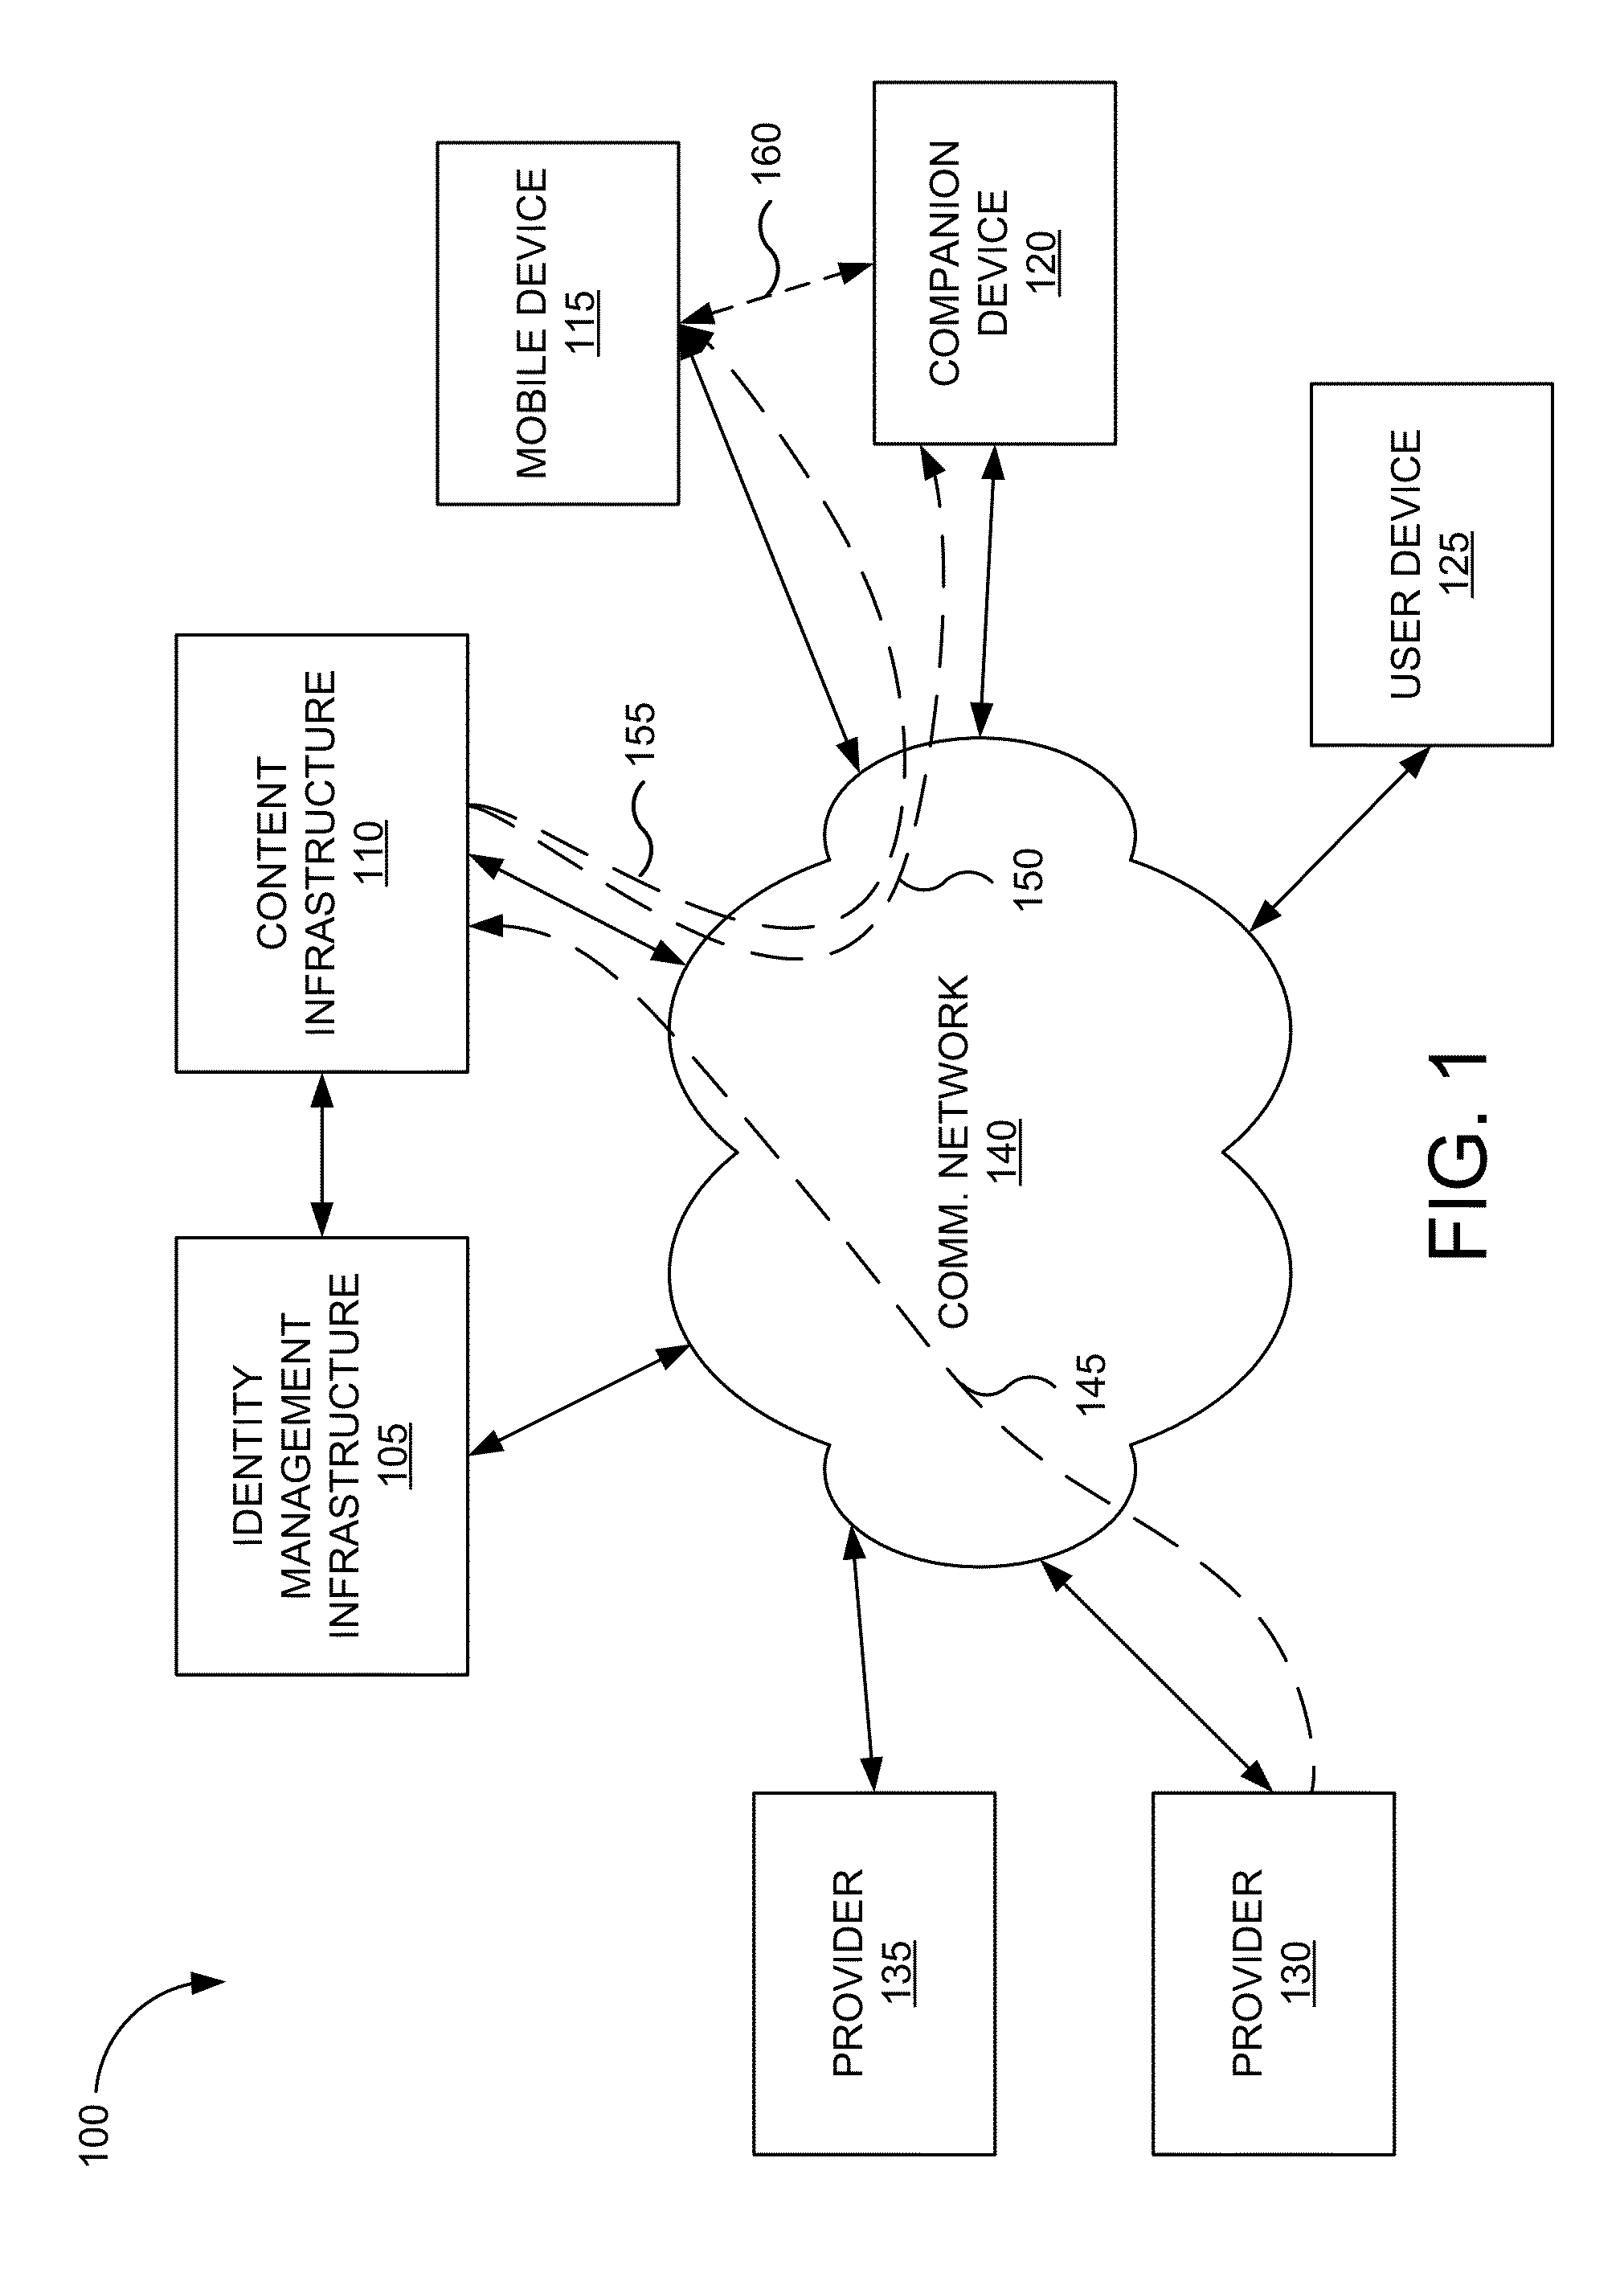 Image display and interaction using a mobile device